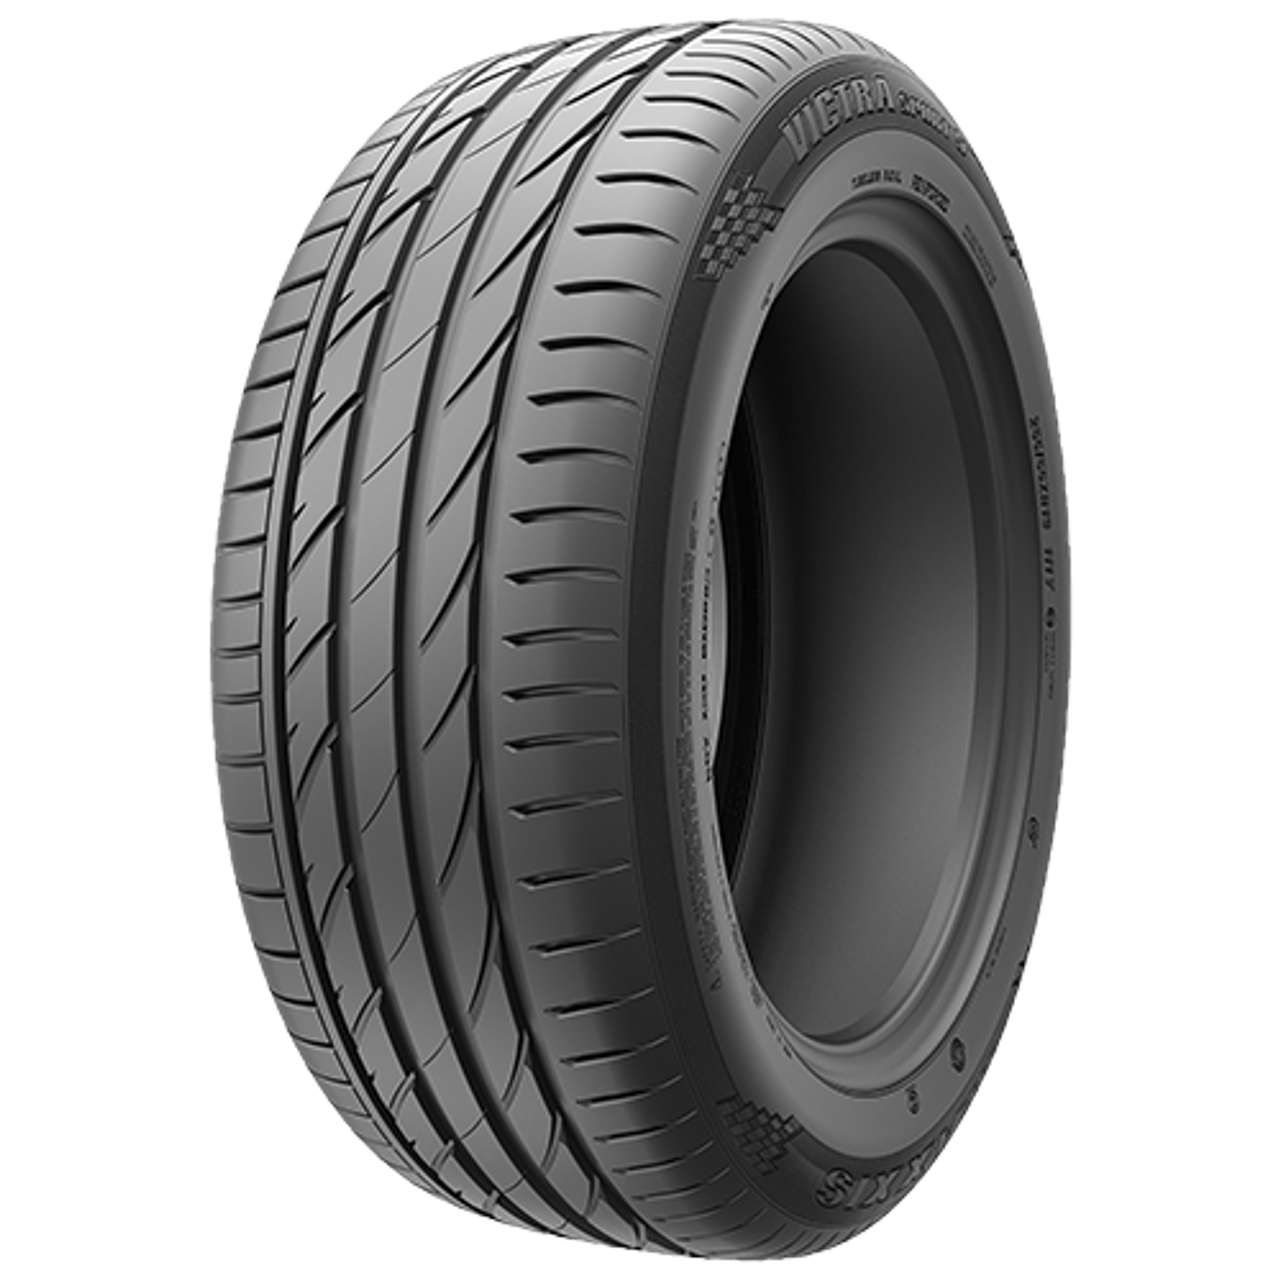 MAXXIS VICTRA SPORT 5 (VS5) 245/45ZR18 100Y MFS BSW